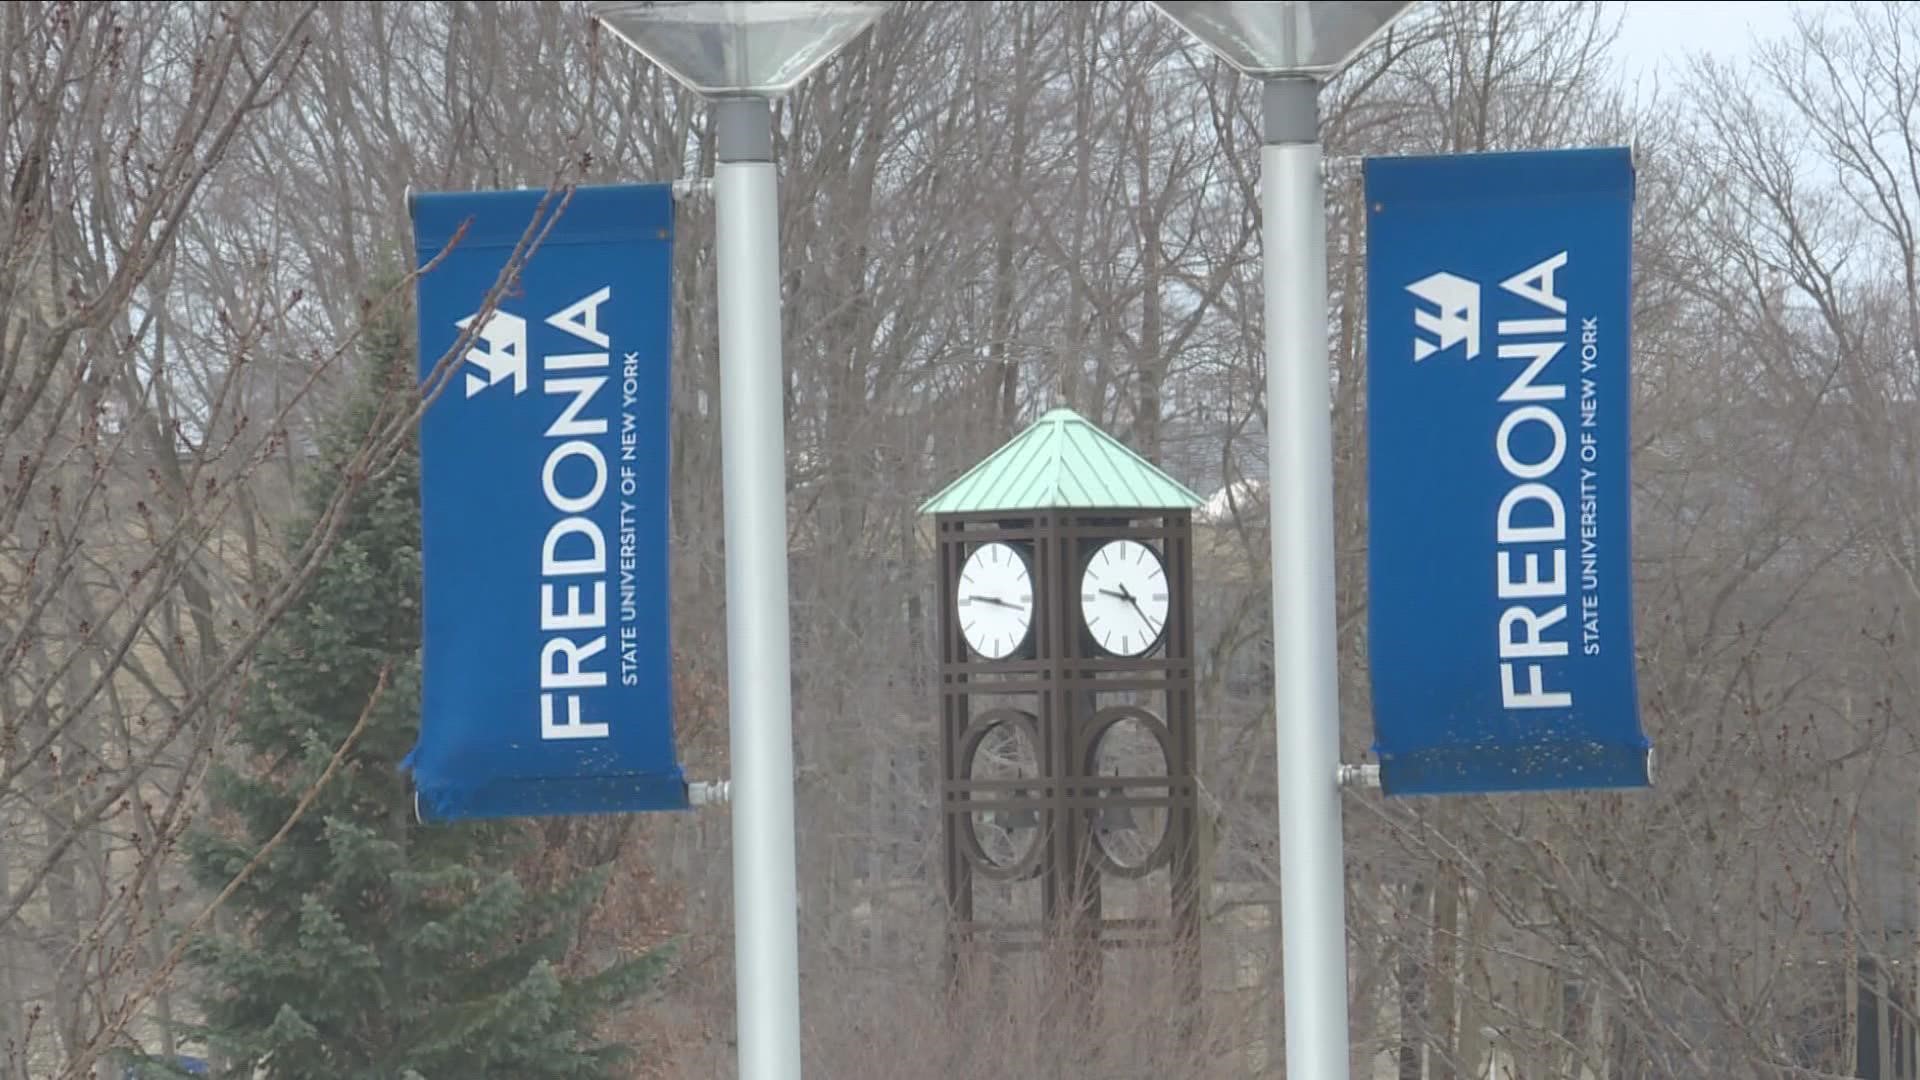 SUNY says it had an increase of more than 110% for fall 2023 applications, compared to fall 2022.